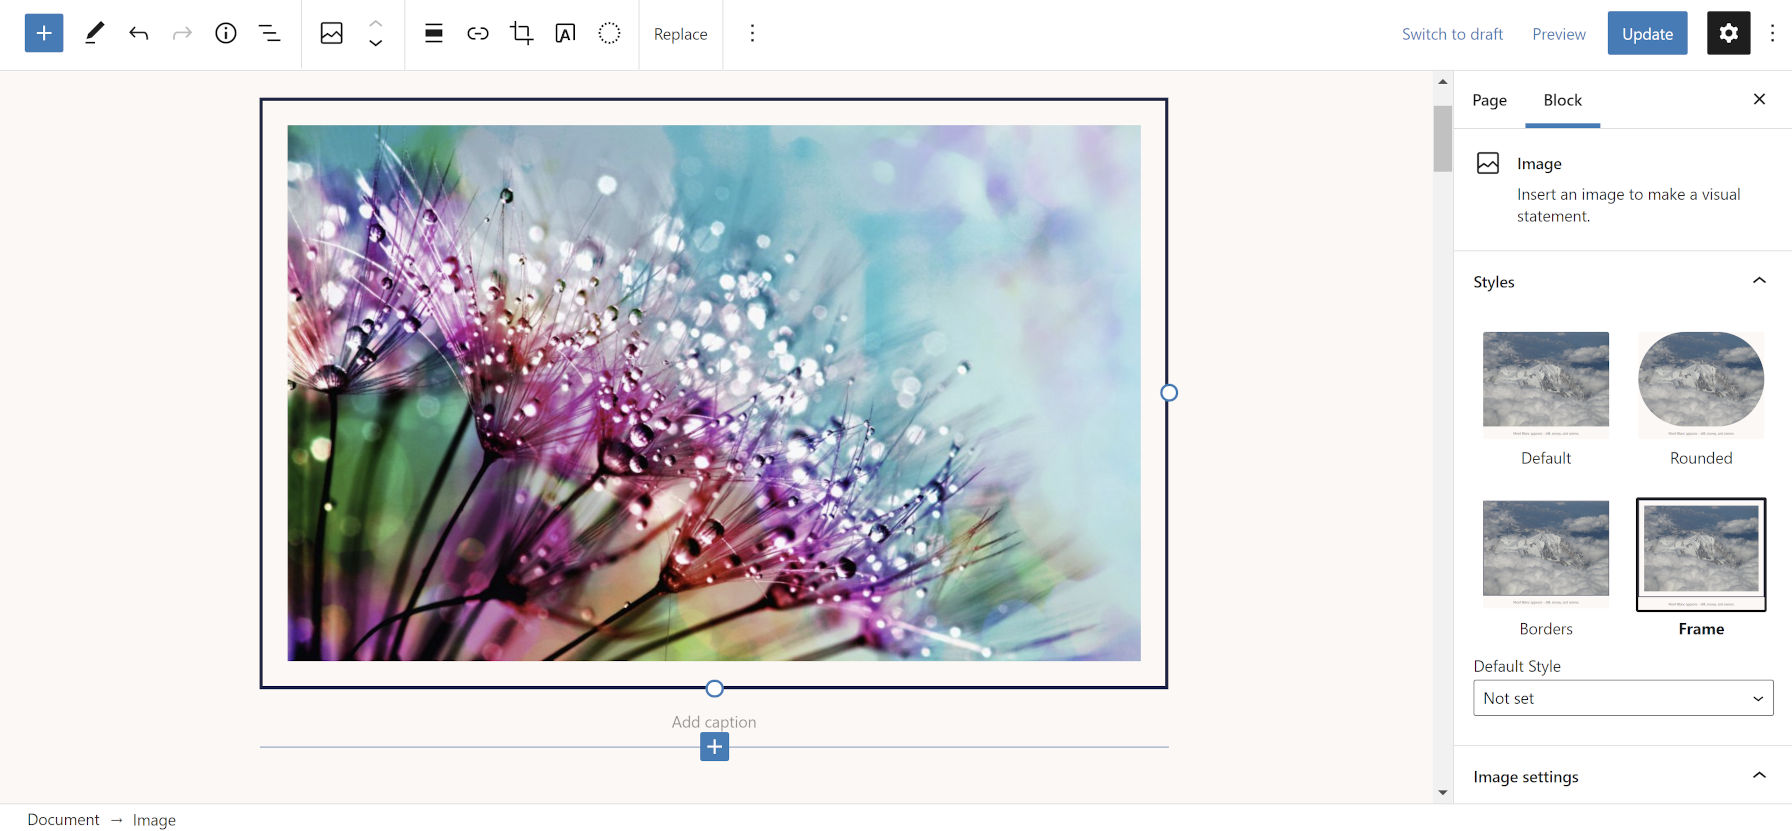 Framed image with black border in the WordPress block editor.